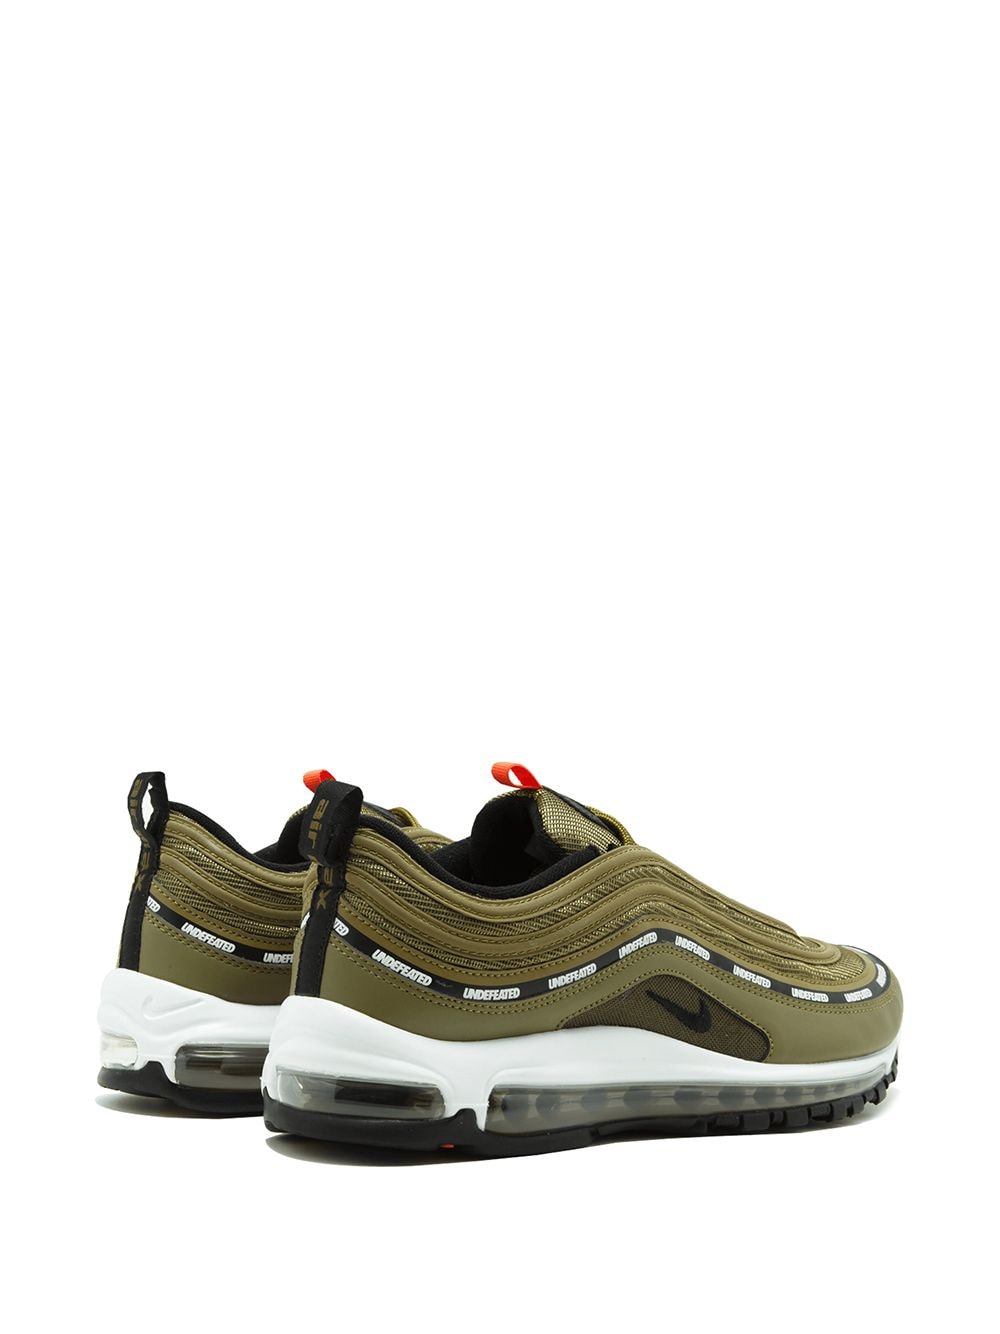 Shop Nike Air Max 97 "undefeated Green" Sneakers